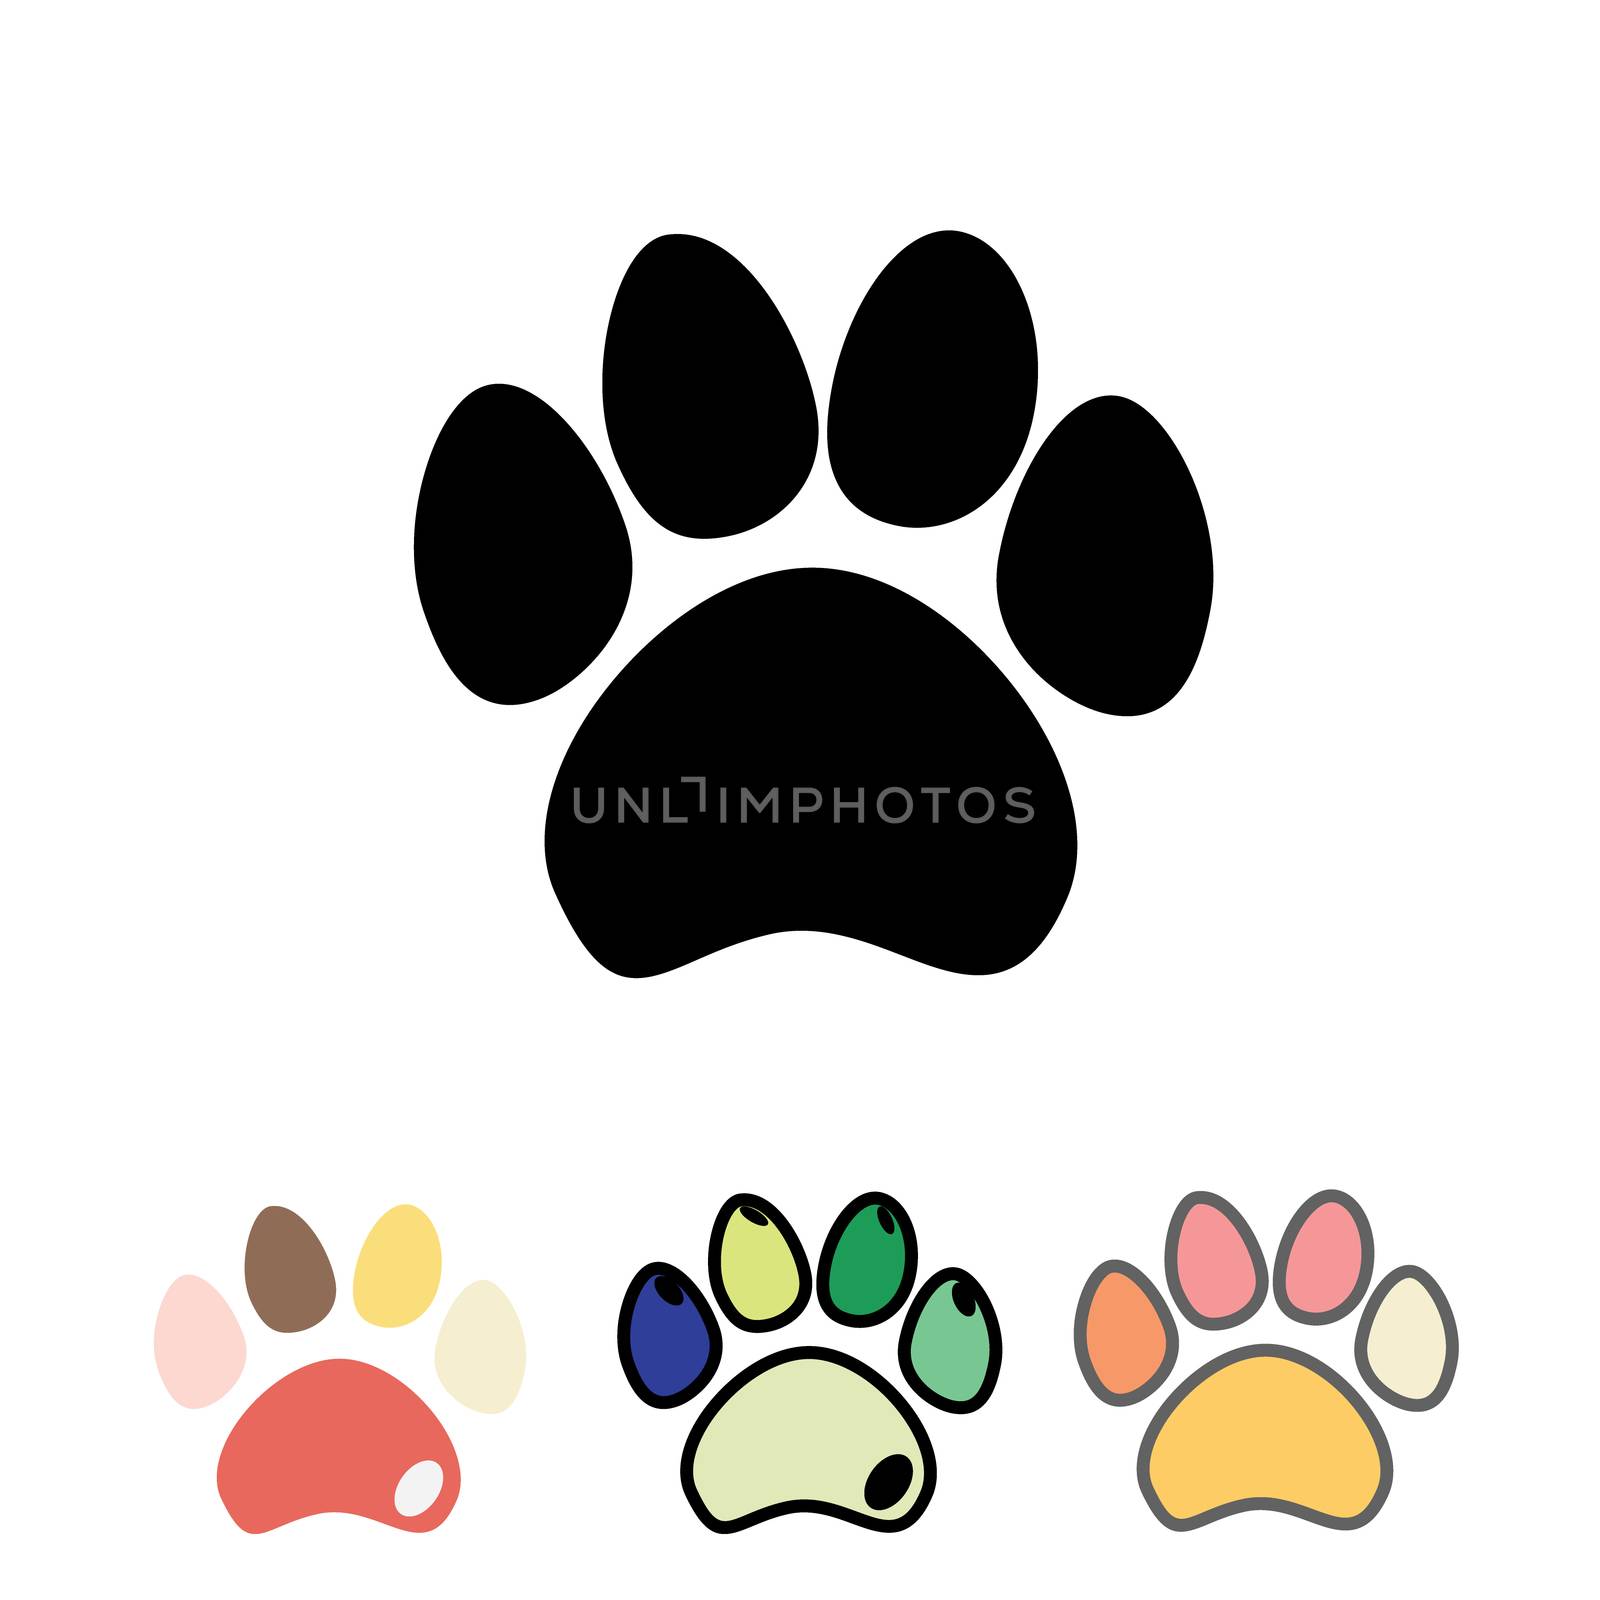 Cats or dogs paws set. Cats and dogs paw icon. by Asnia